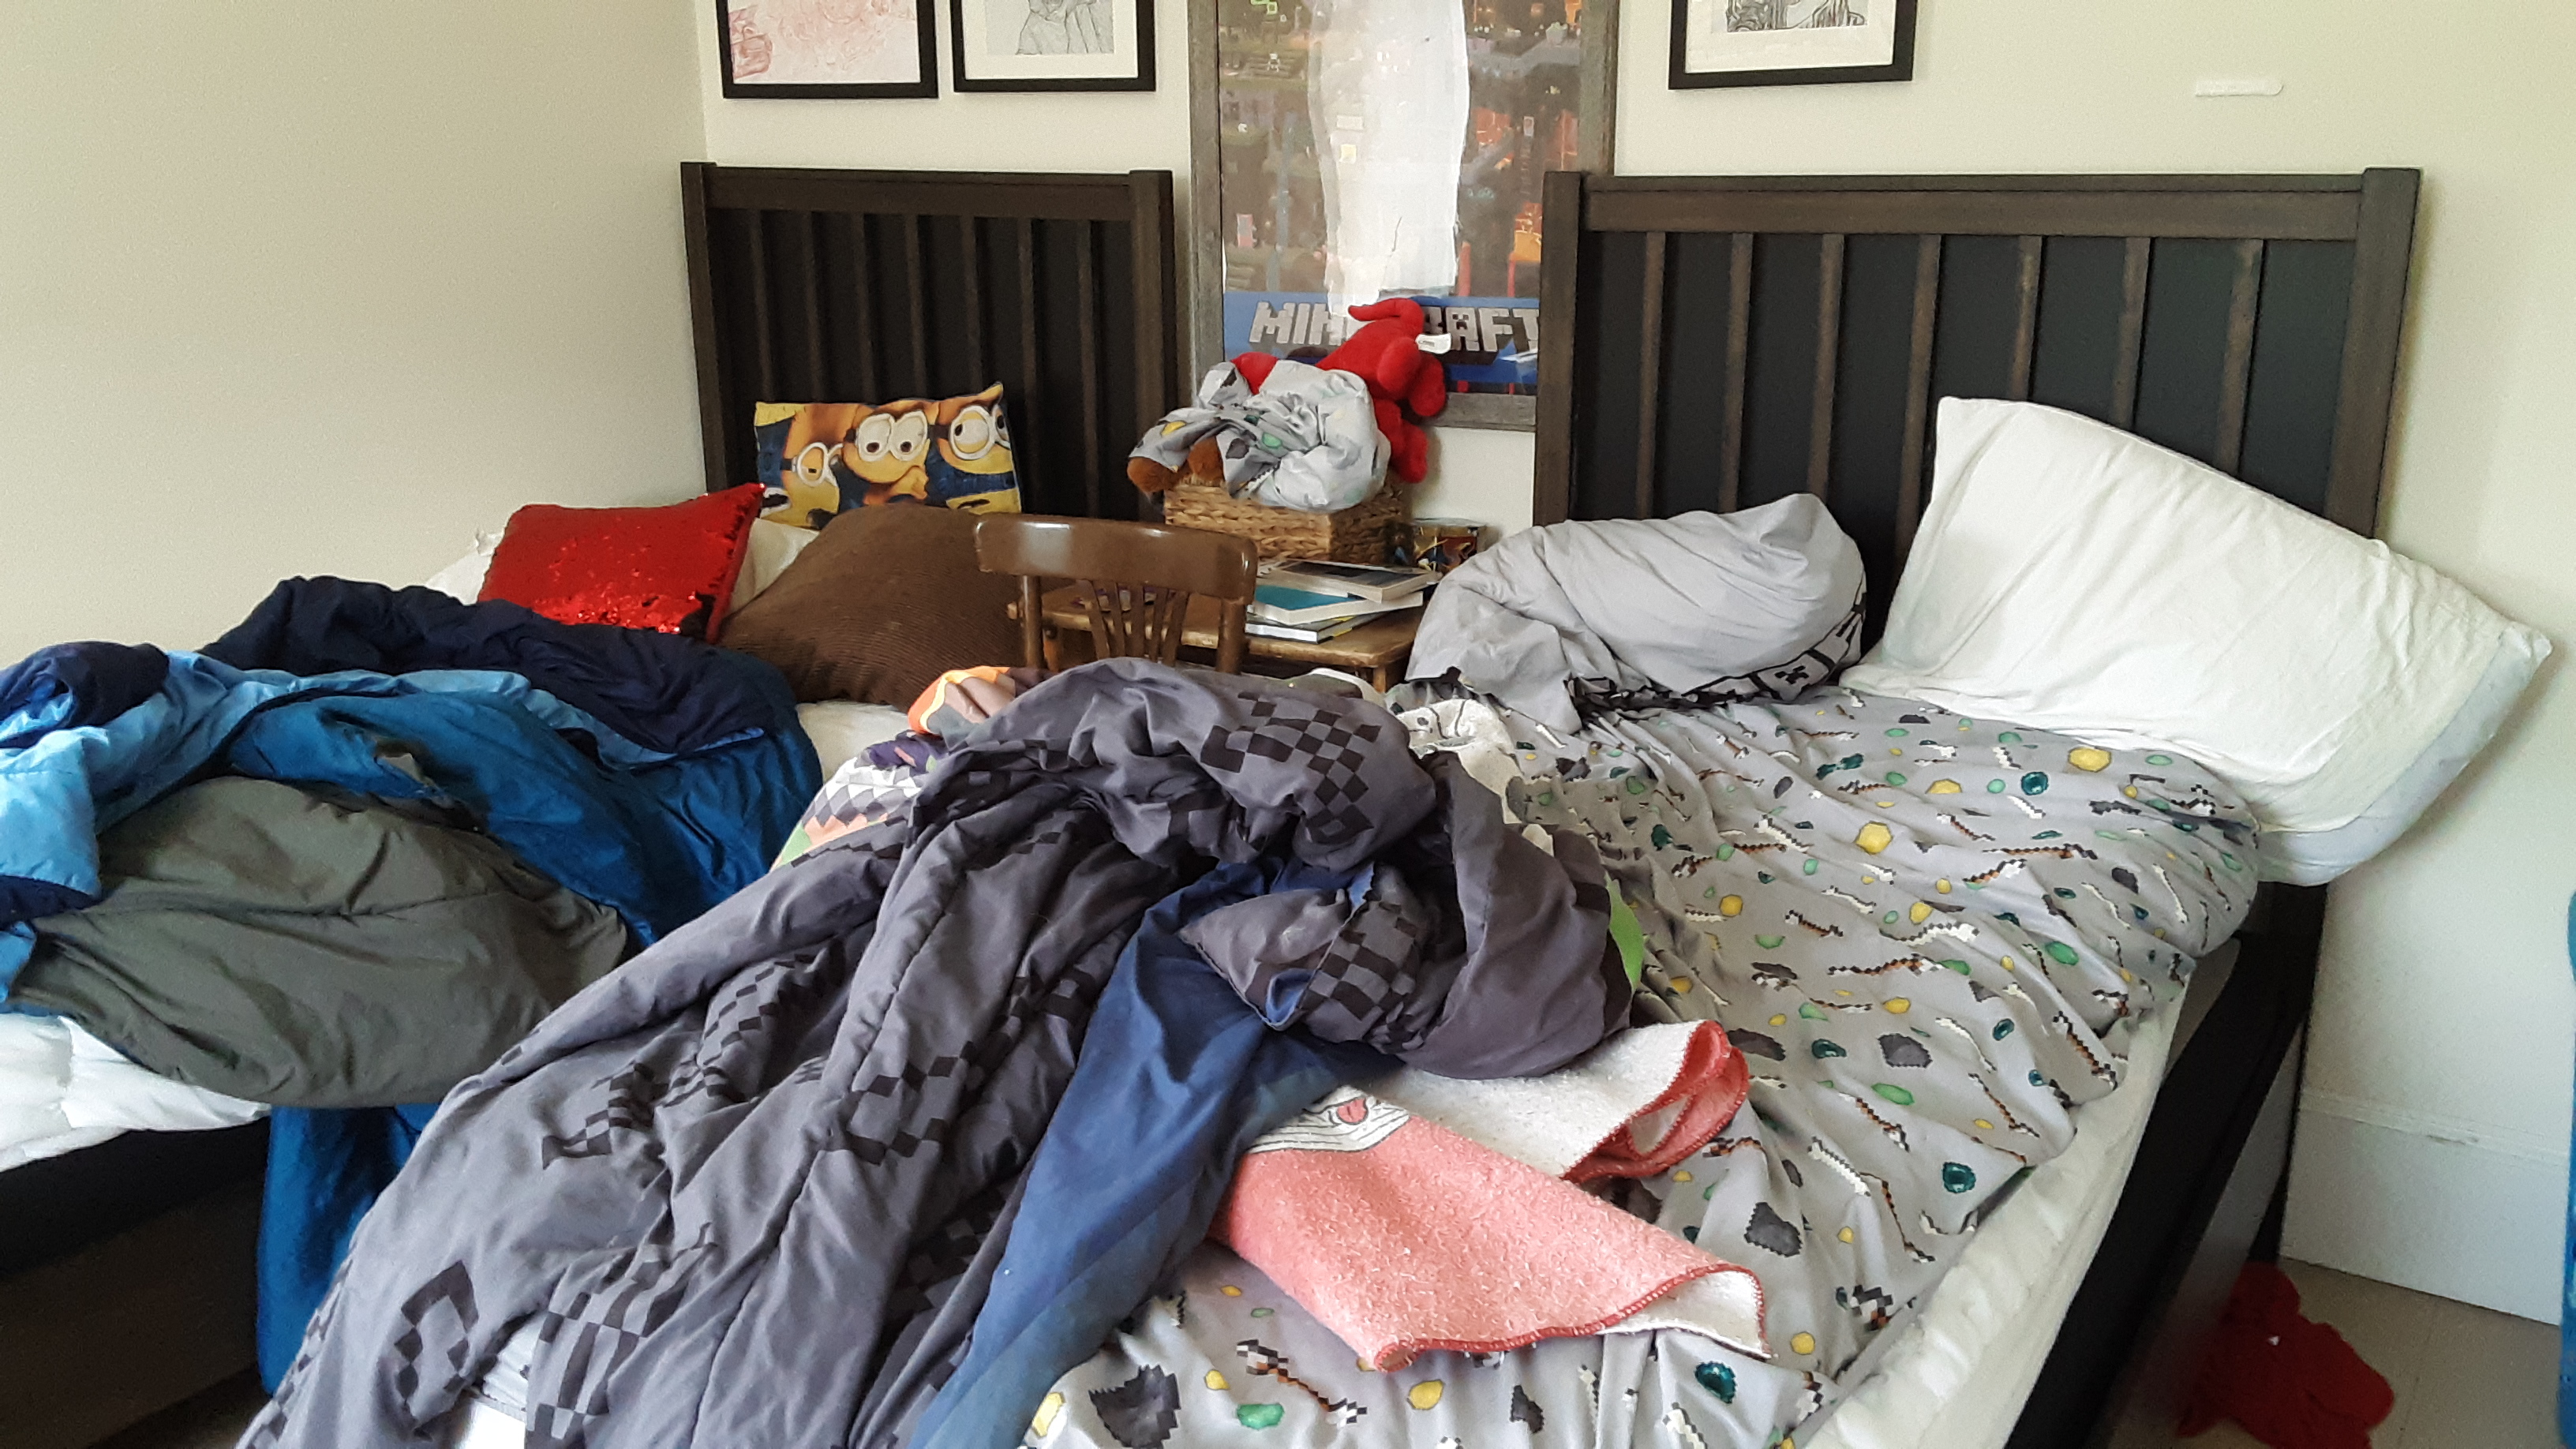 A More Welcoming Boys’ Bedroom